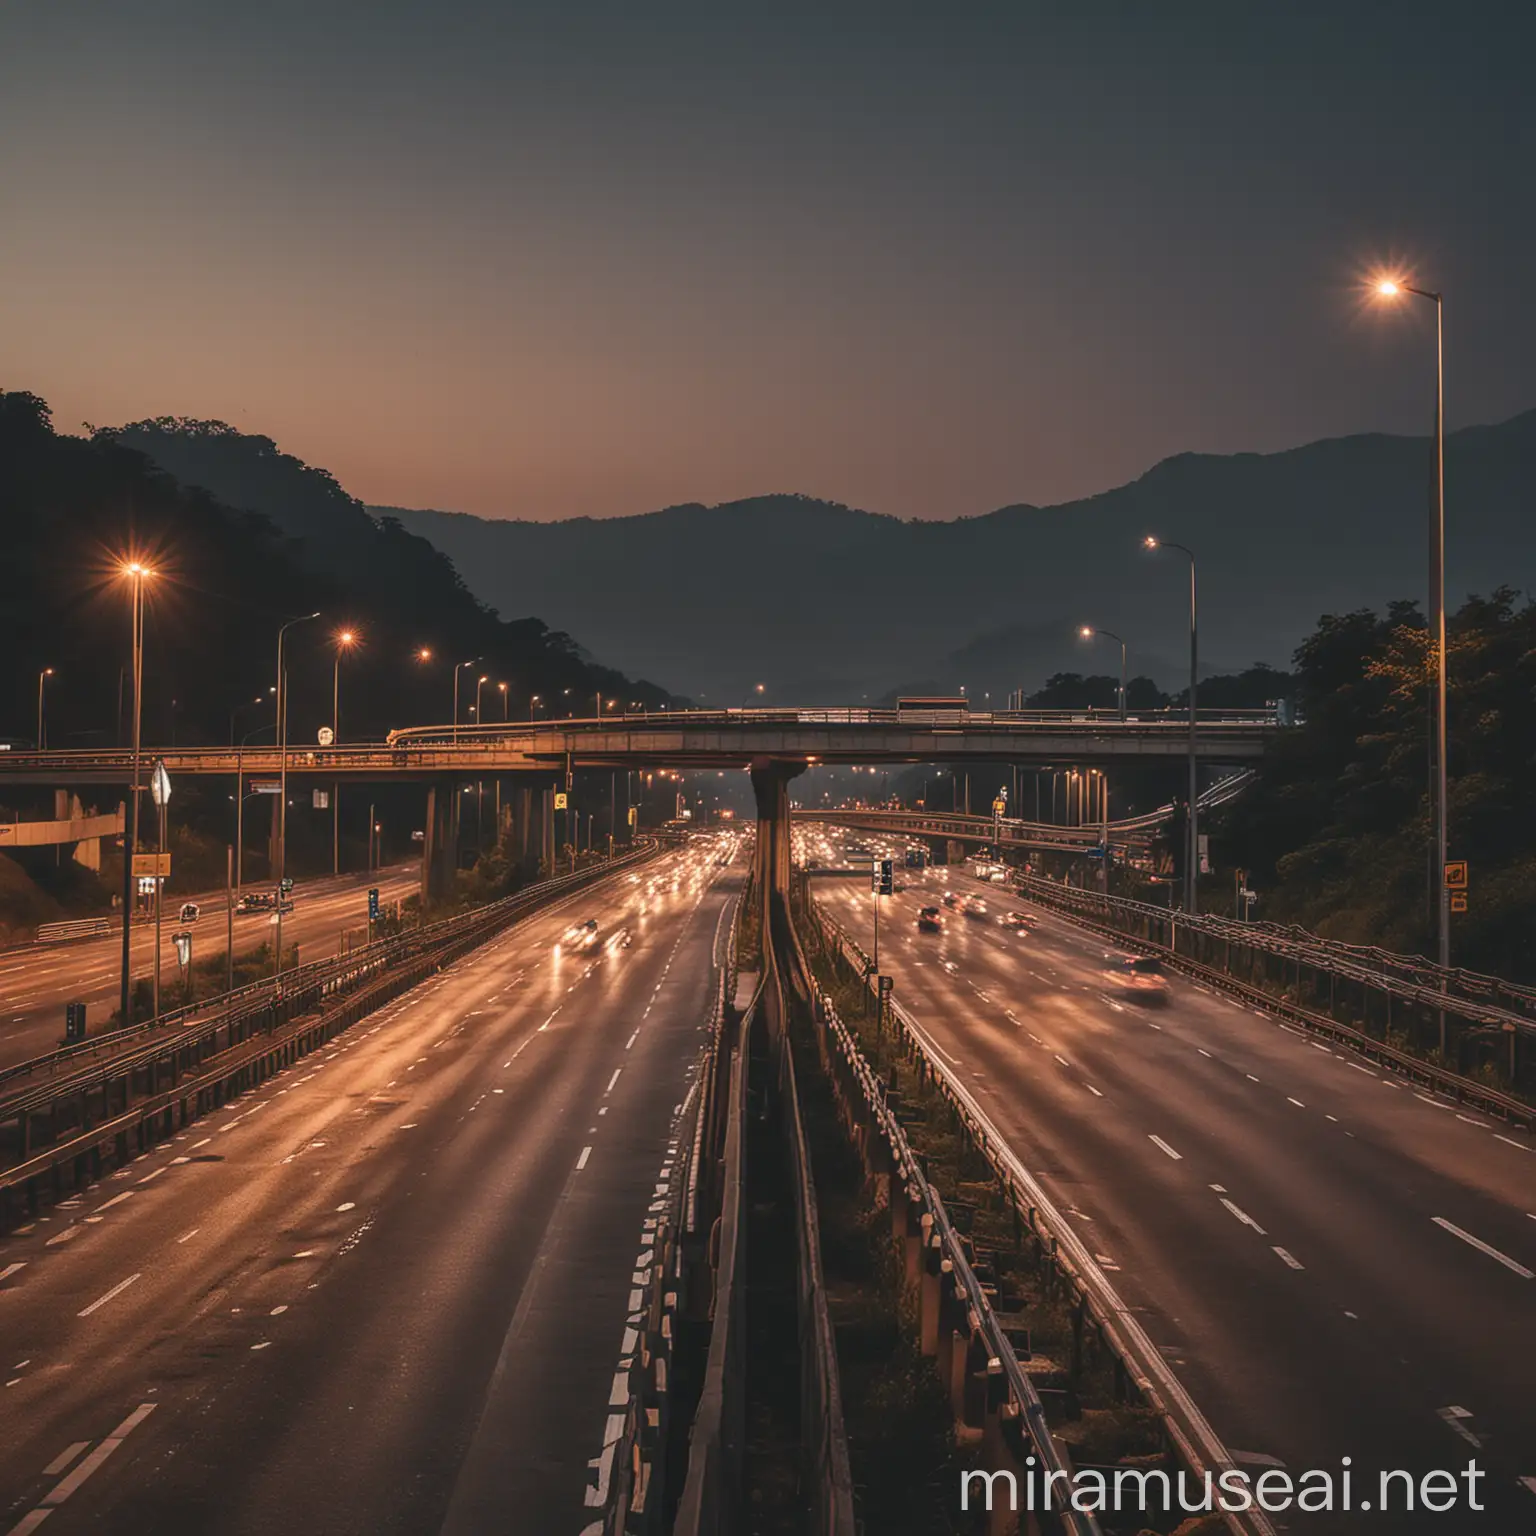 Street photography at evening time in highways